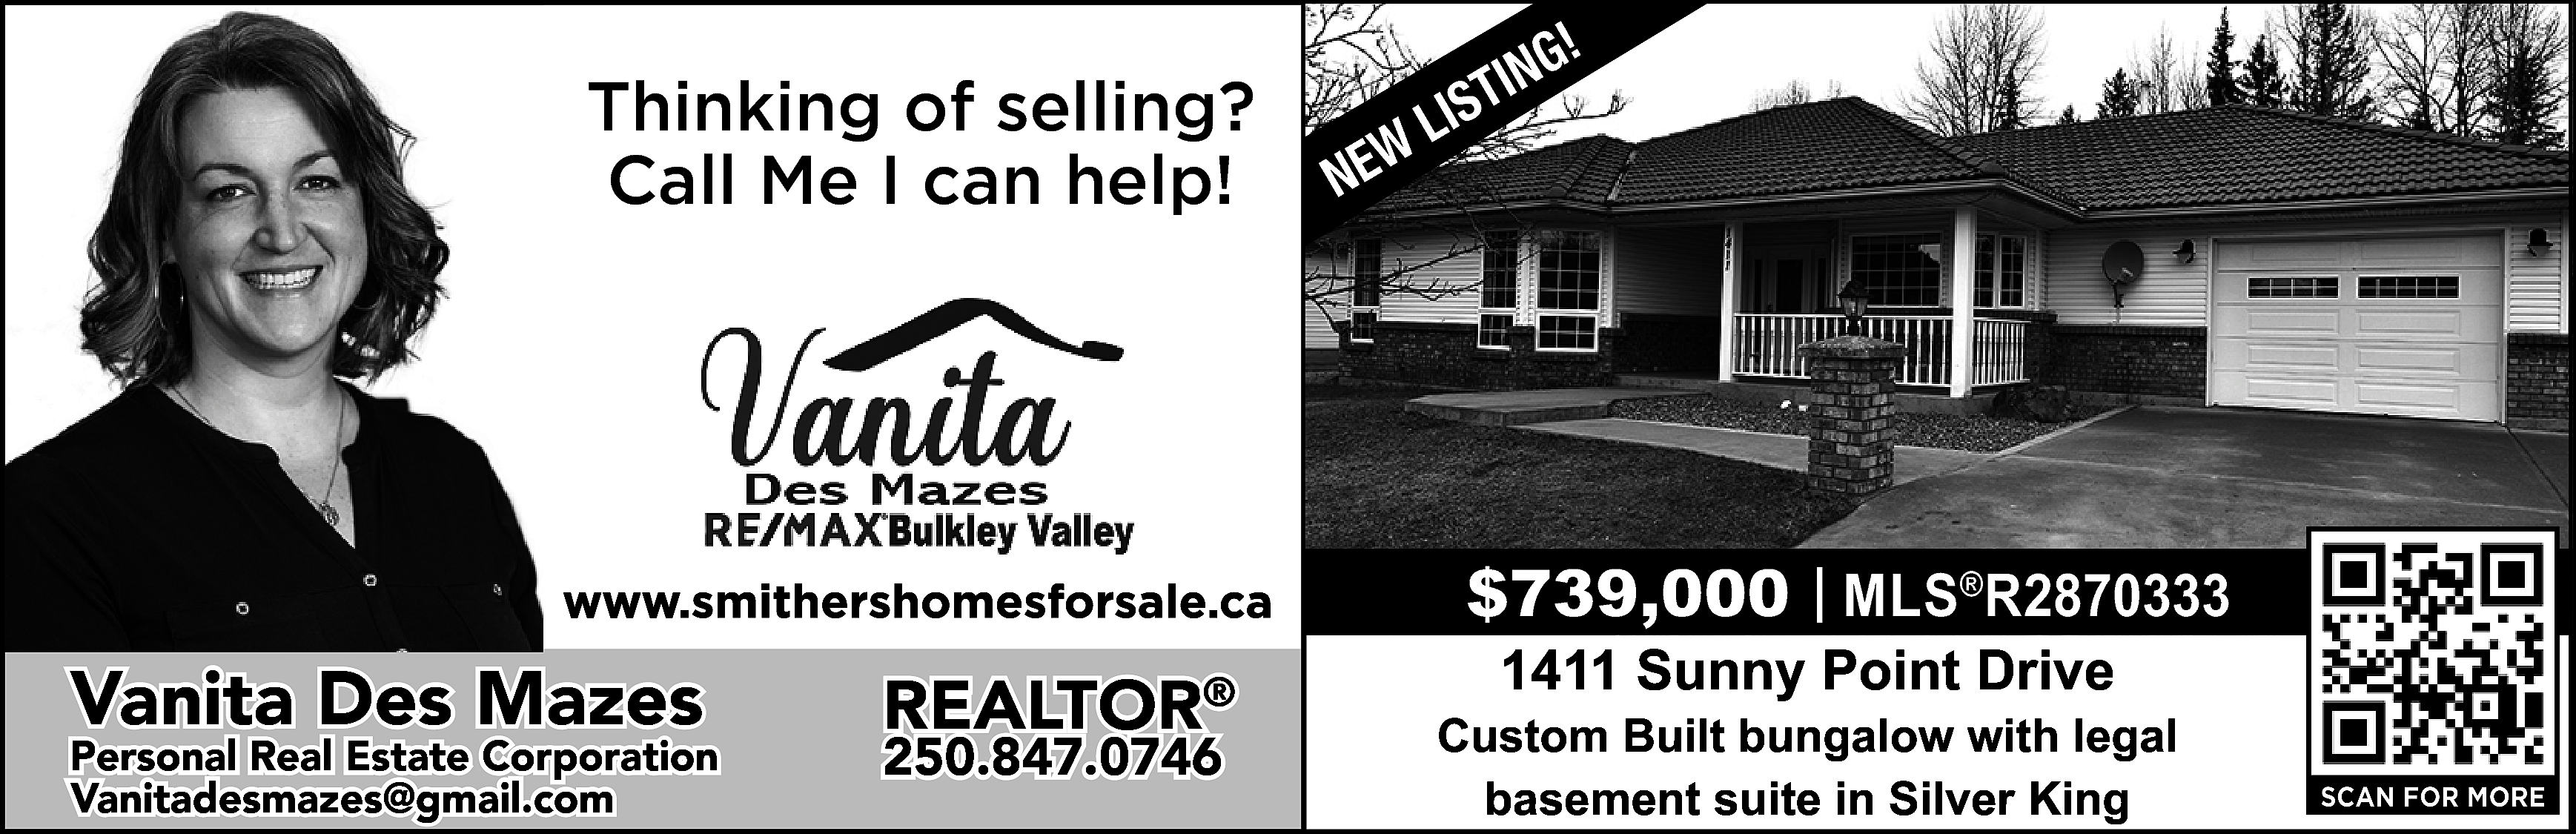 Thinking of selling? <br>Call Me  Thinking of selling?  Call Me I can help!    https://www.smithershomesforsale.ca/    Vanita Des Mazes    Personal Real Estate Corporation  vanitadesmazes@gmail.com  Vanitadesmazes@gmail.com    REALTOR®  250.847.0746    W  NE    !  ING  T  S  LI    $739,000 | MLS®R2870333  1411 Sunny Point Drive    Custom Built bungalow with legal  basement suite in Silver King    SCAN FOR MORE    